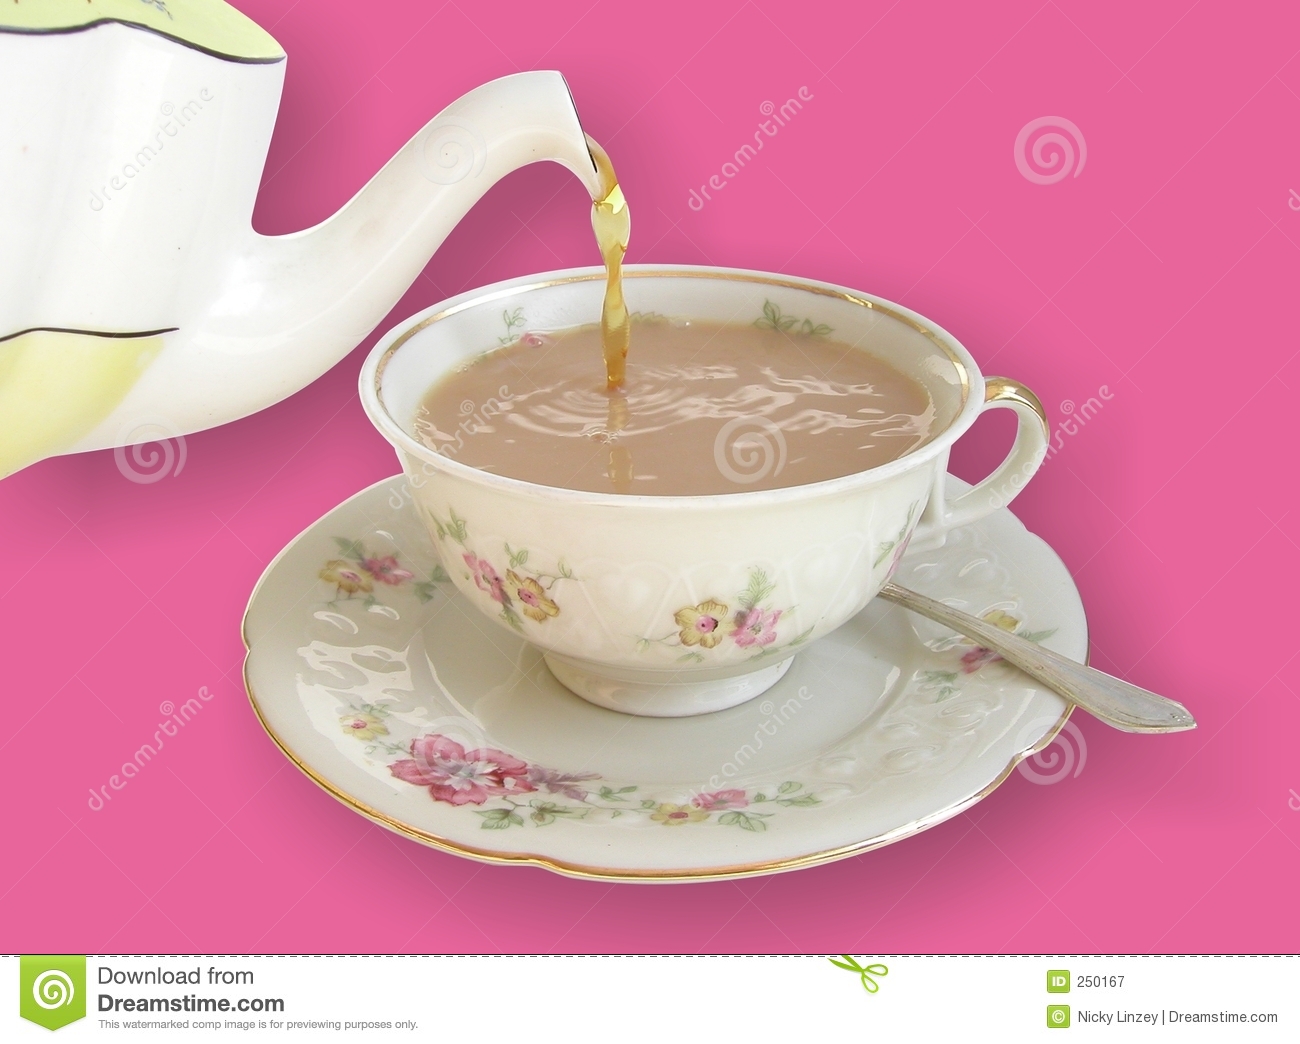 Chinese Tea Clipart Pouring Tea Royalty Free Stock